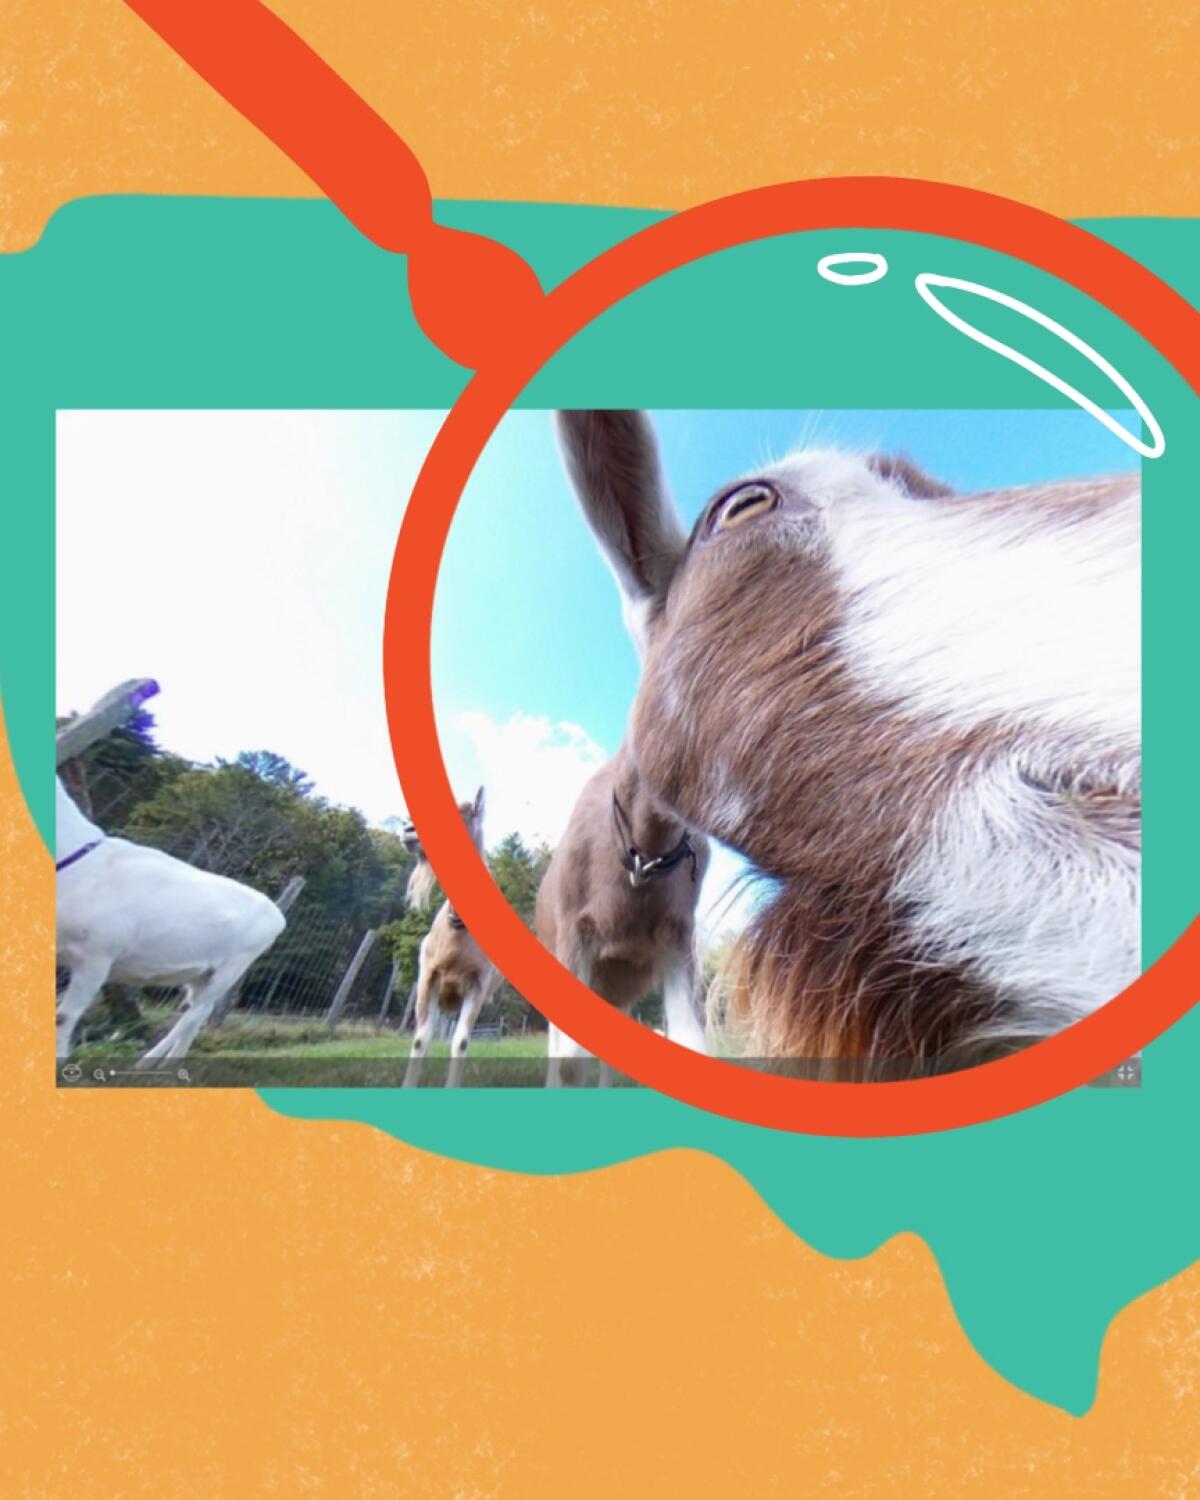 Screengrab from nps.gov of goat looking close to a camera paired with an illustration of magnifying glass